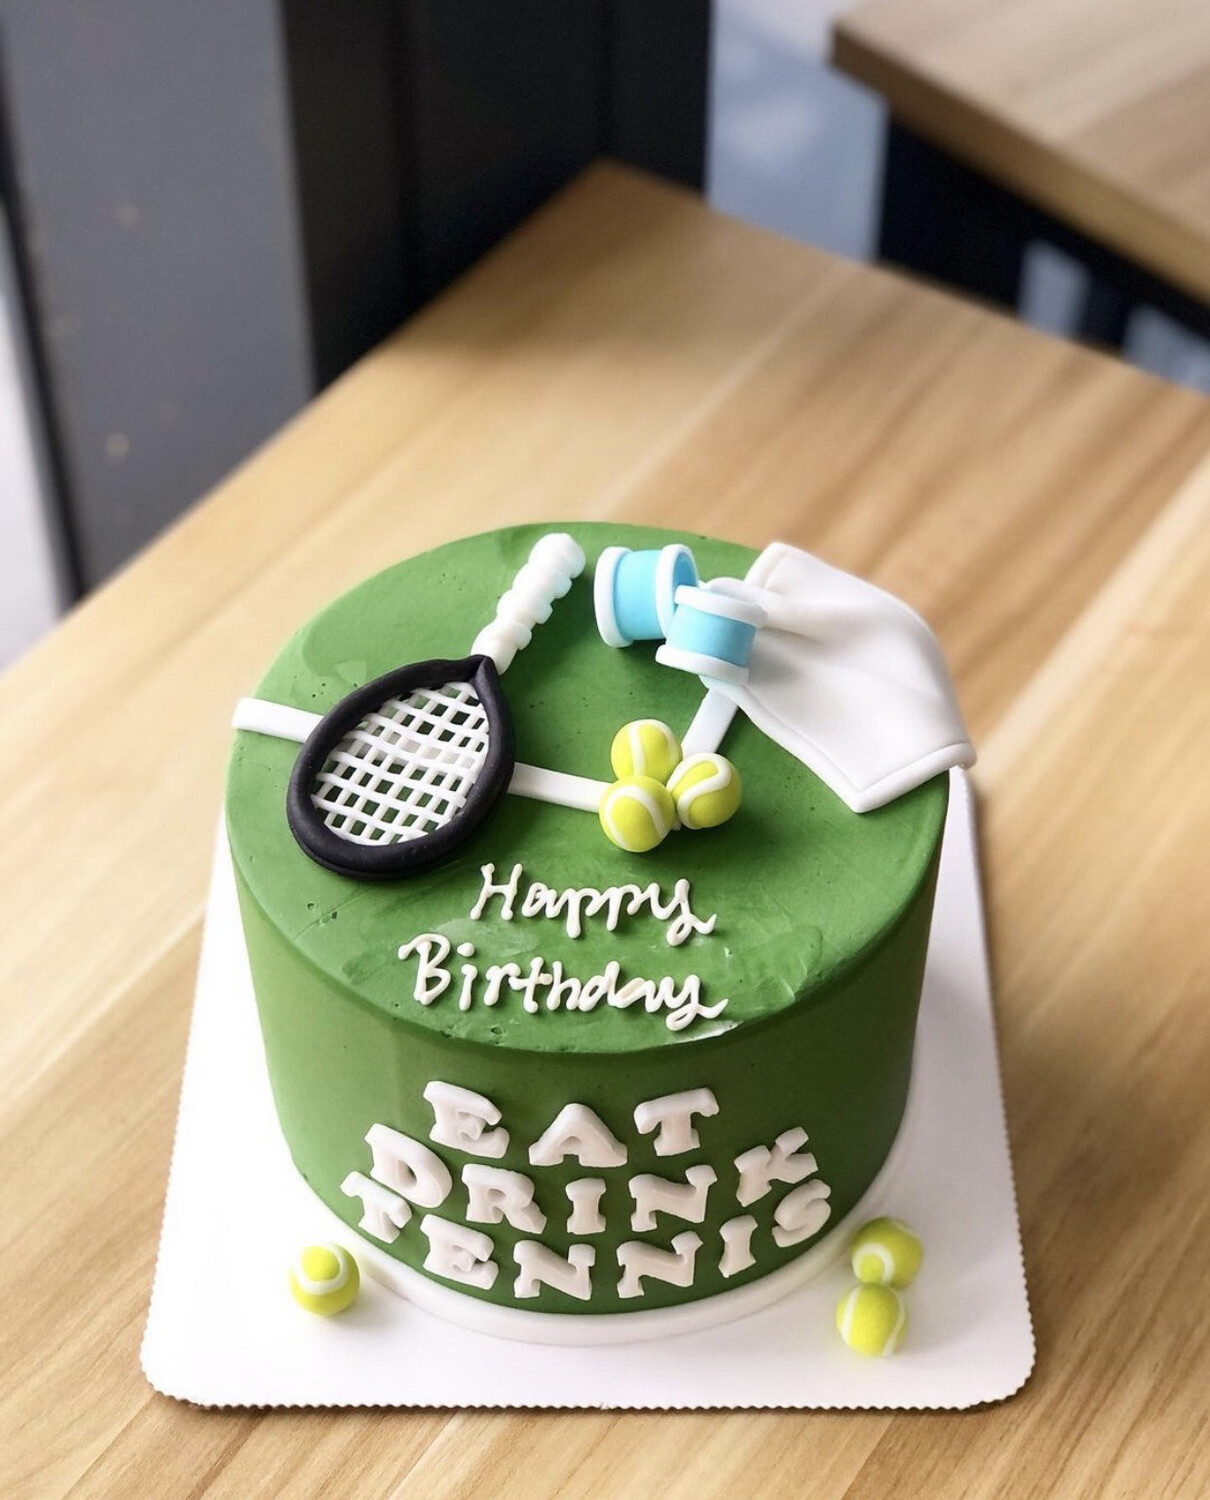 Tennis Cake - Buy Online, Free UK Delivery — New Cakes